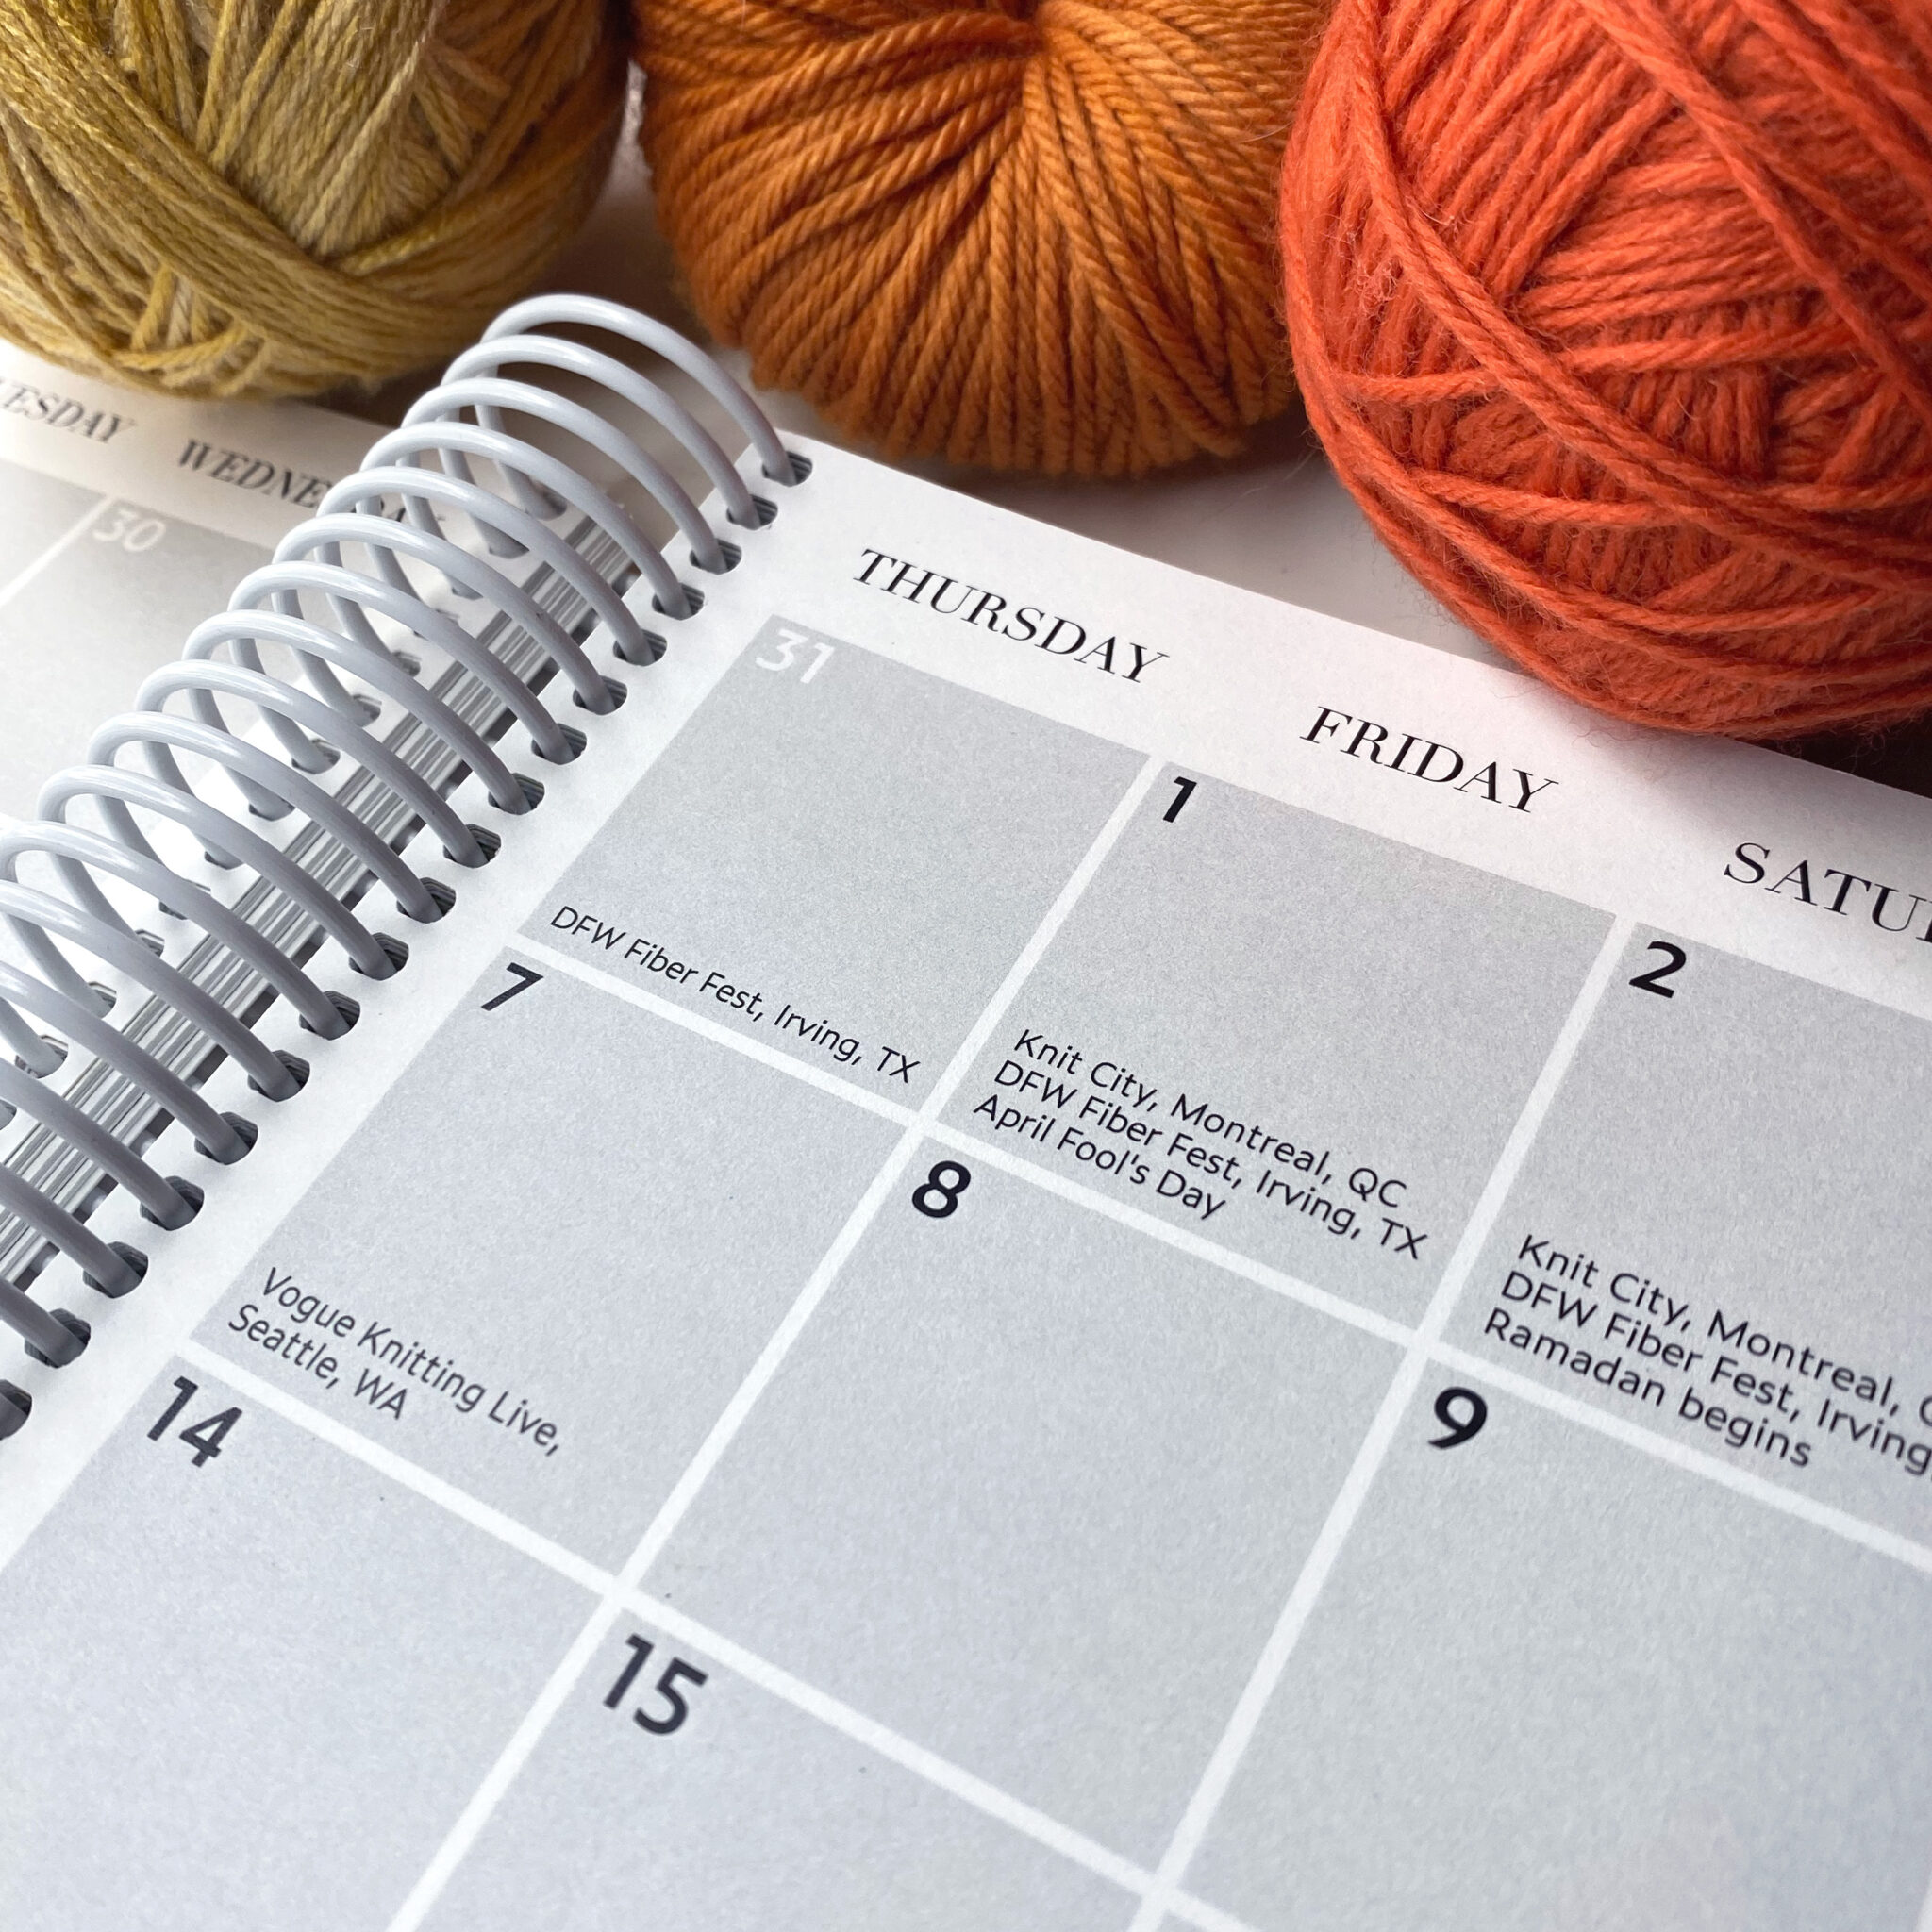 Knitting Events in 2023 The Knitter's Planner